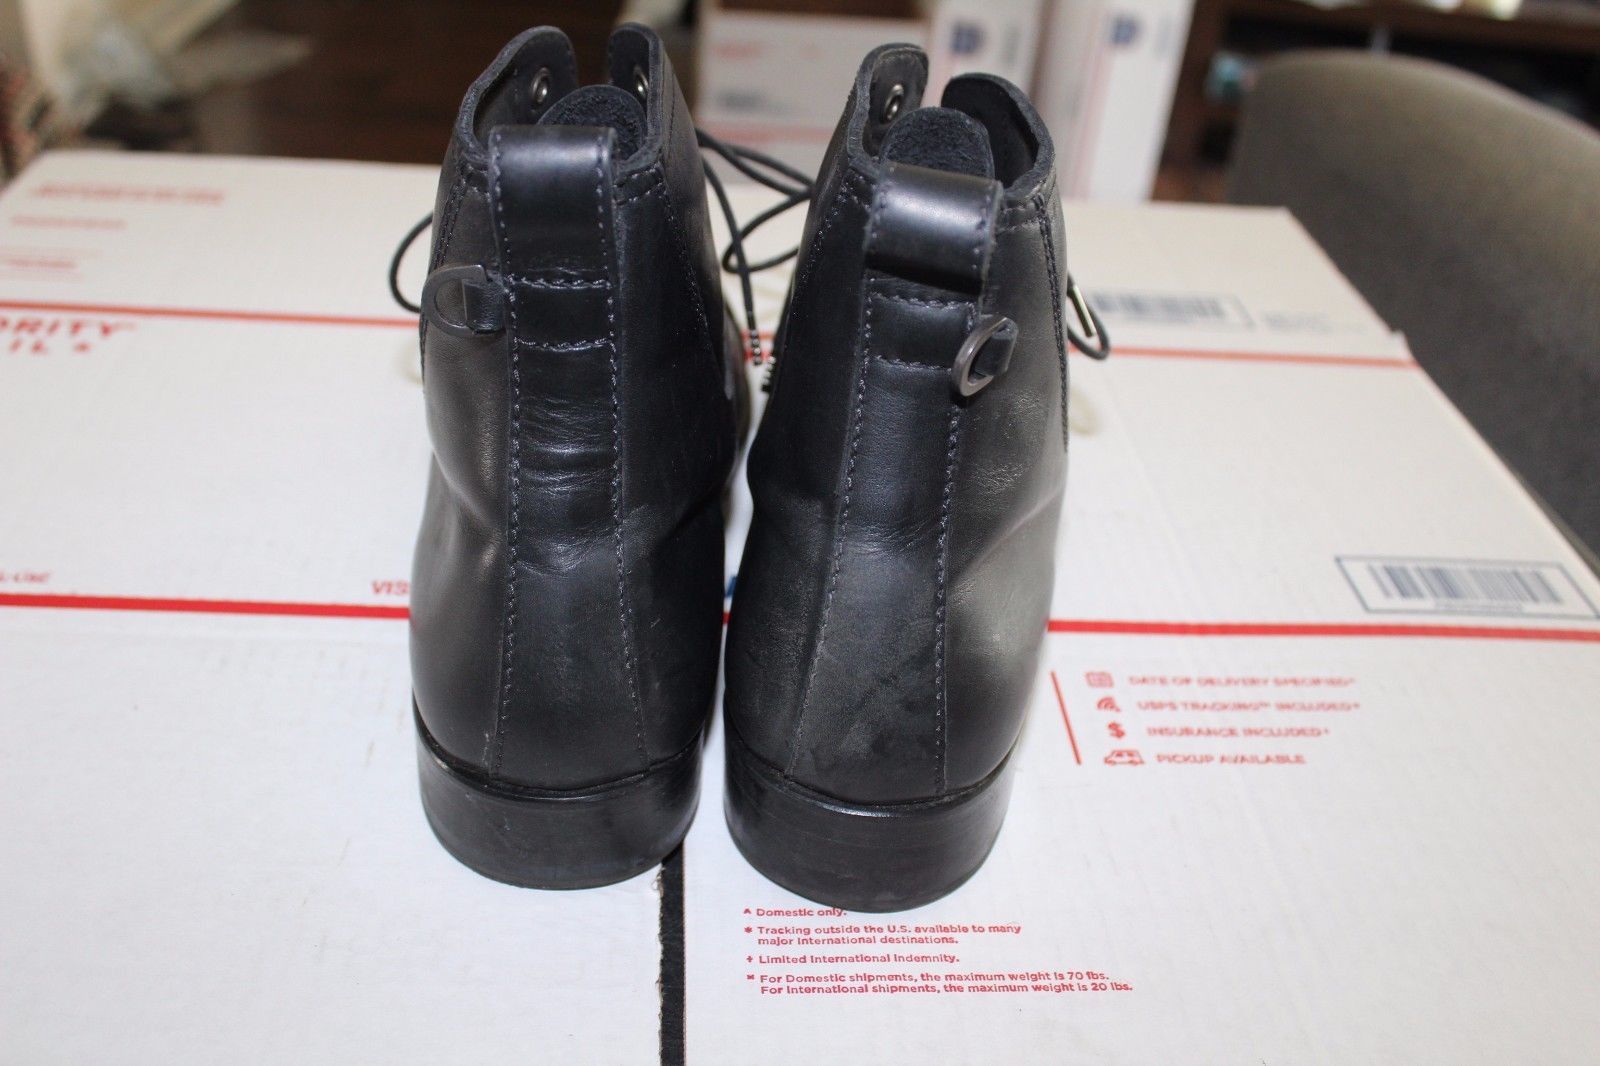 Helmut Lang HELMUT LANG ARCHIVE MADE IN INTALY COMBAT BOOT BLACK LEATHER SIZE 41 EU / 8 US Size US 8 / EU 41 - 4 Thumbnail